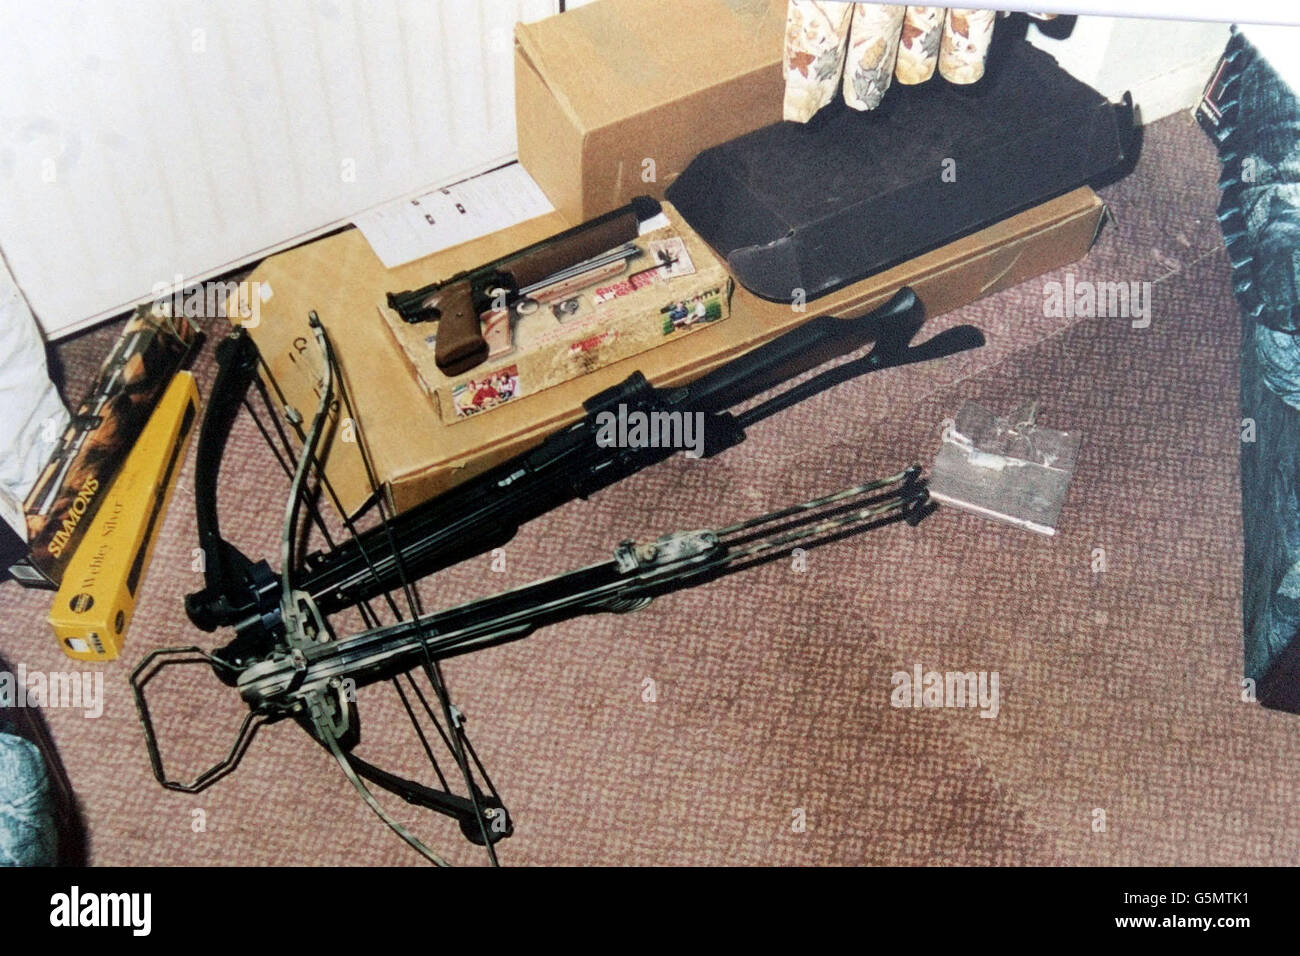 Undated collect of the arsenal of weapons used by Mark Telford to shoot two horses, issued Wednesday January 23, 2002. Plumber Mark Telford, 28, was jailed today at Newcastle Crown Court for a total of 2 years for criminal damage and firearms offences after shooting the horses with a crossbow. In March 2000 a three-year-old mare, Frisco, was found in her field with 18-inch bolts sticking out of her neck and rib cage, and Prince, a five-year-old gelding, had been shot between the eyes. Telford was described as being fascinated by weapons and was told by Judge Lancaster that he had an unhealthy Stock Photo